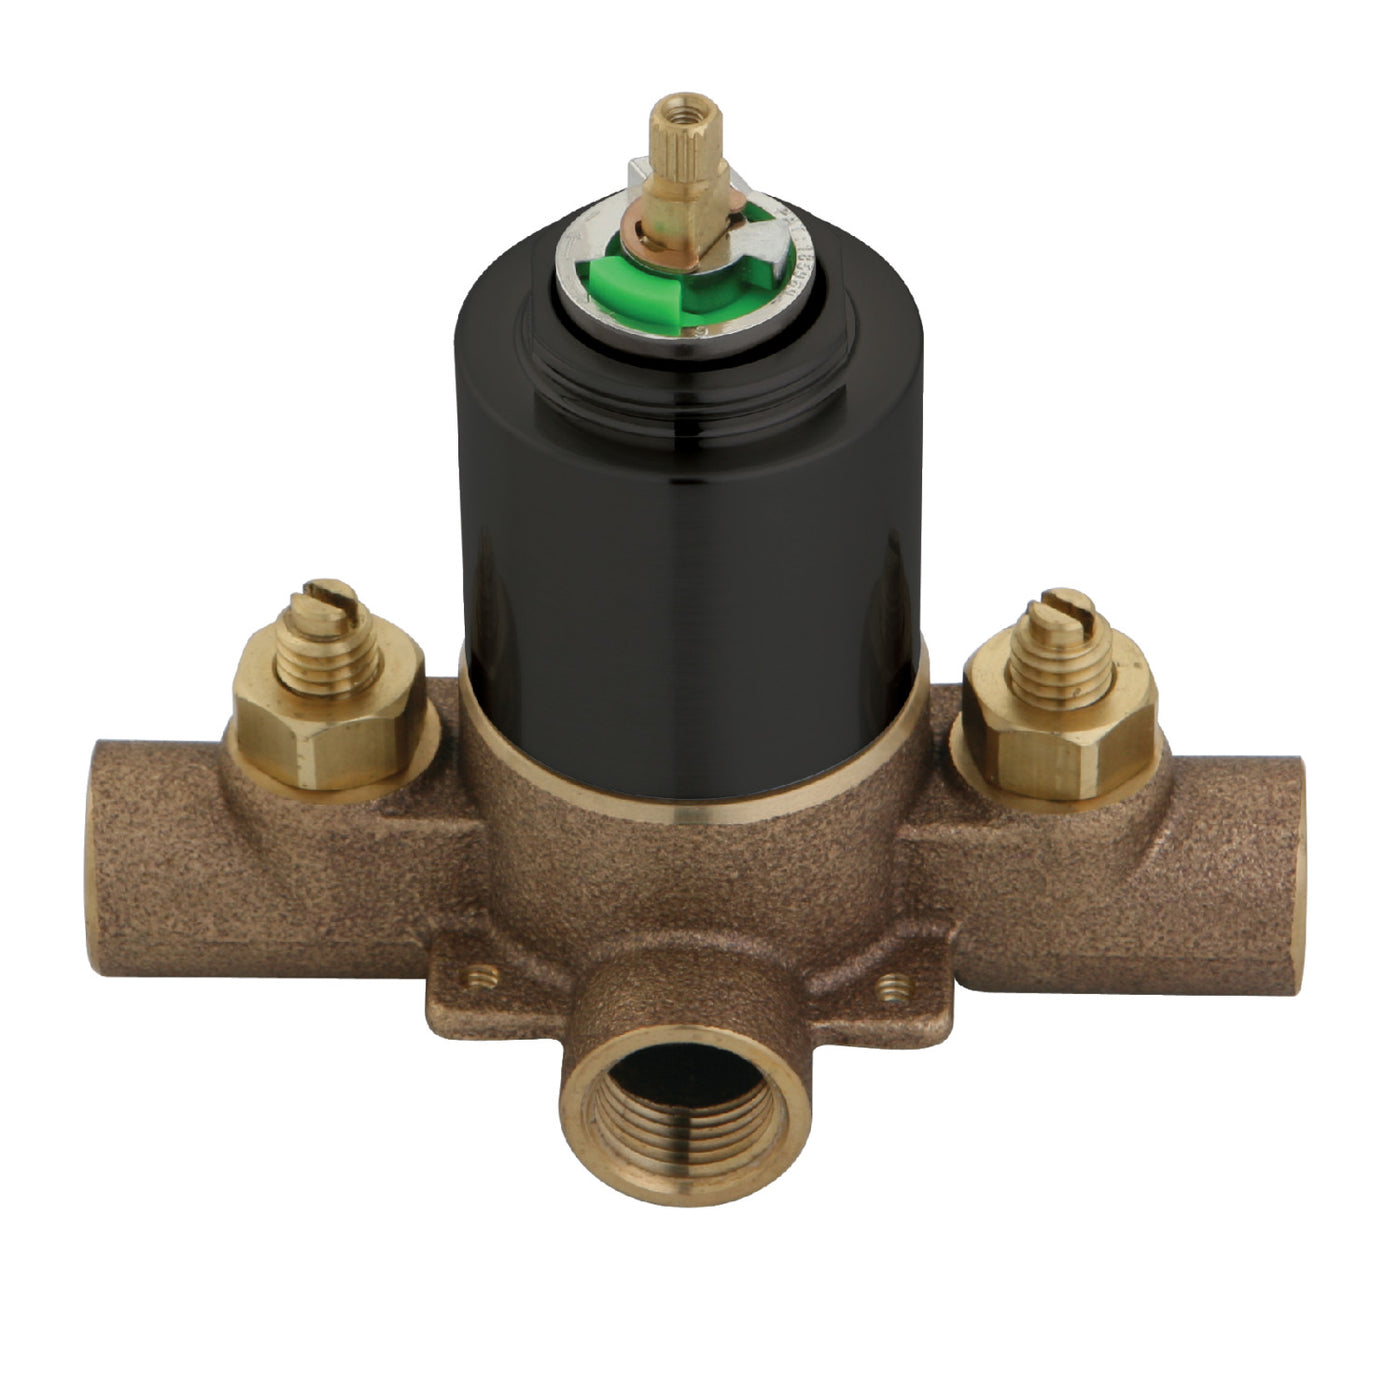 Elements of Design EB655V Pressure Balanced Rough-In Tub and Shower Valve with Stops, Oil Rubbed Bronze